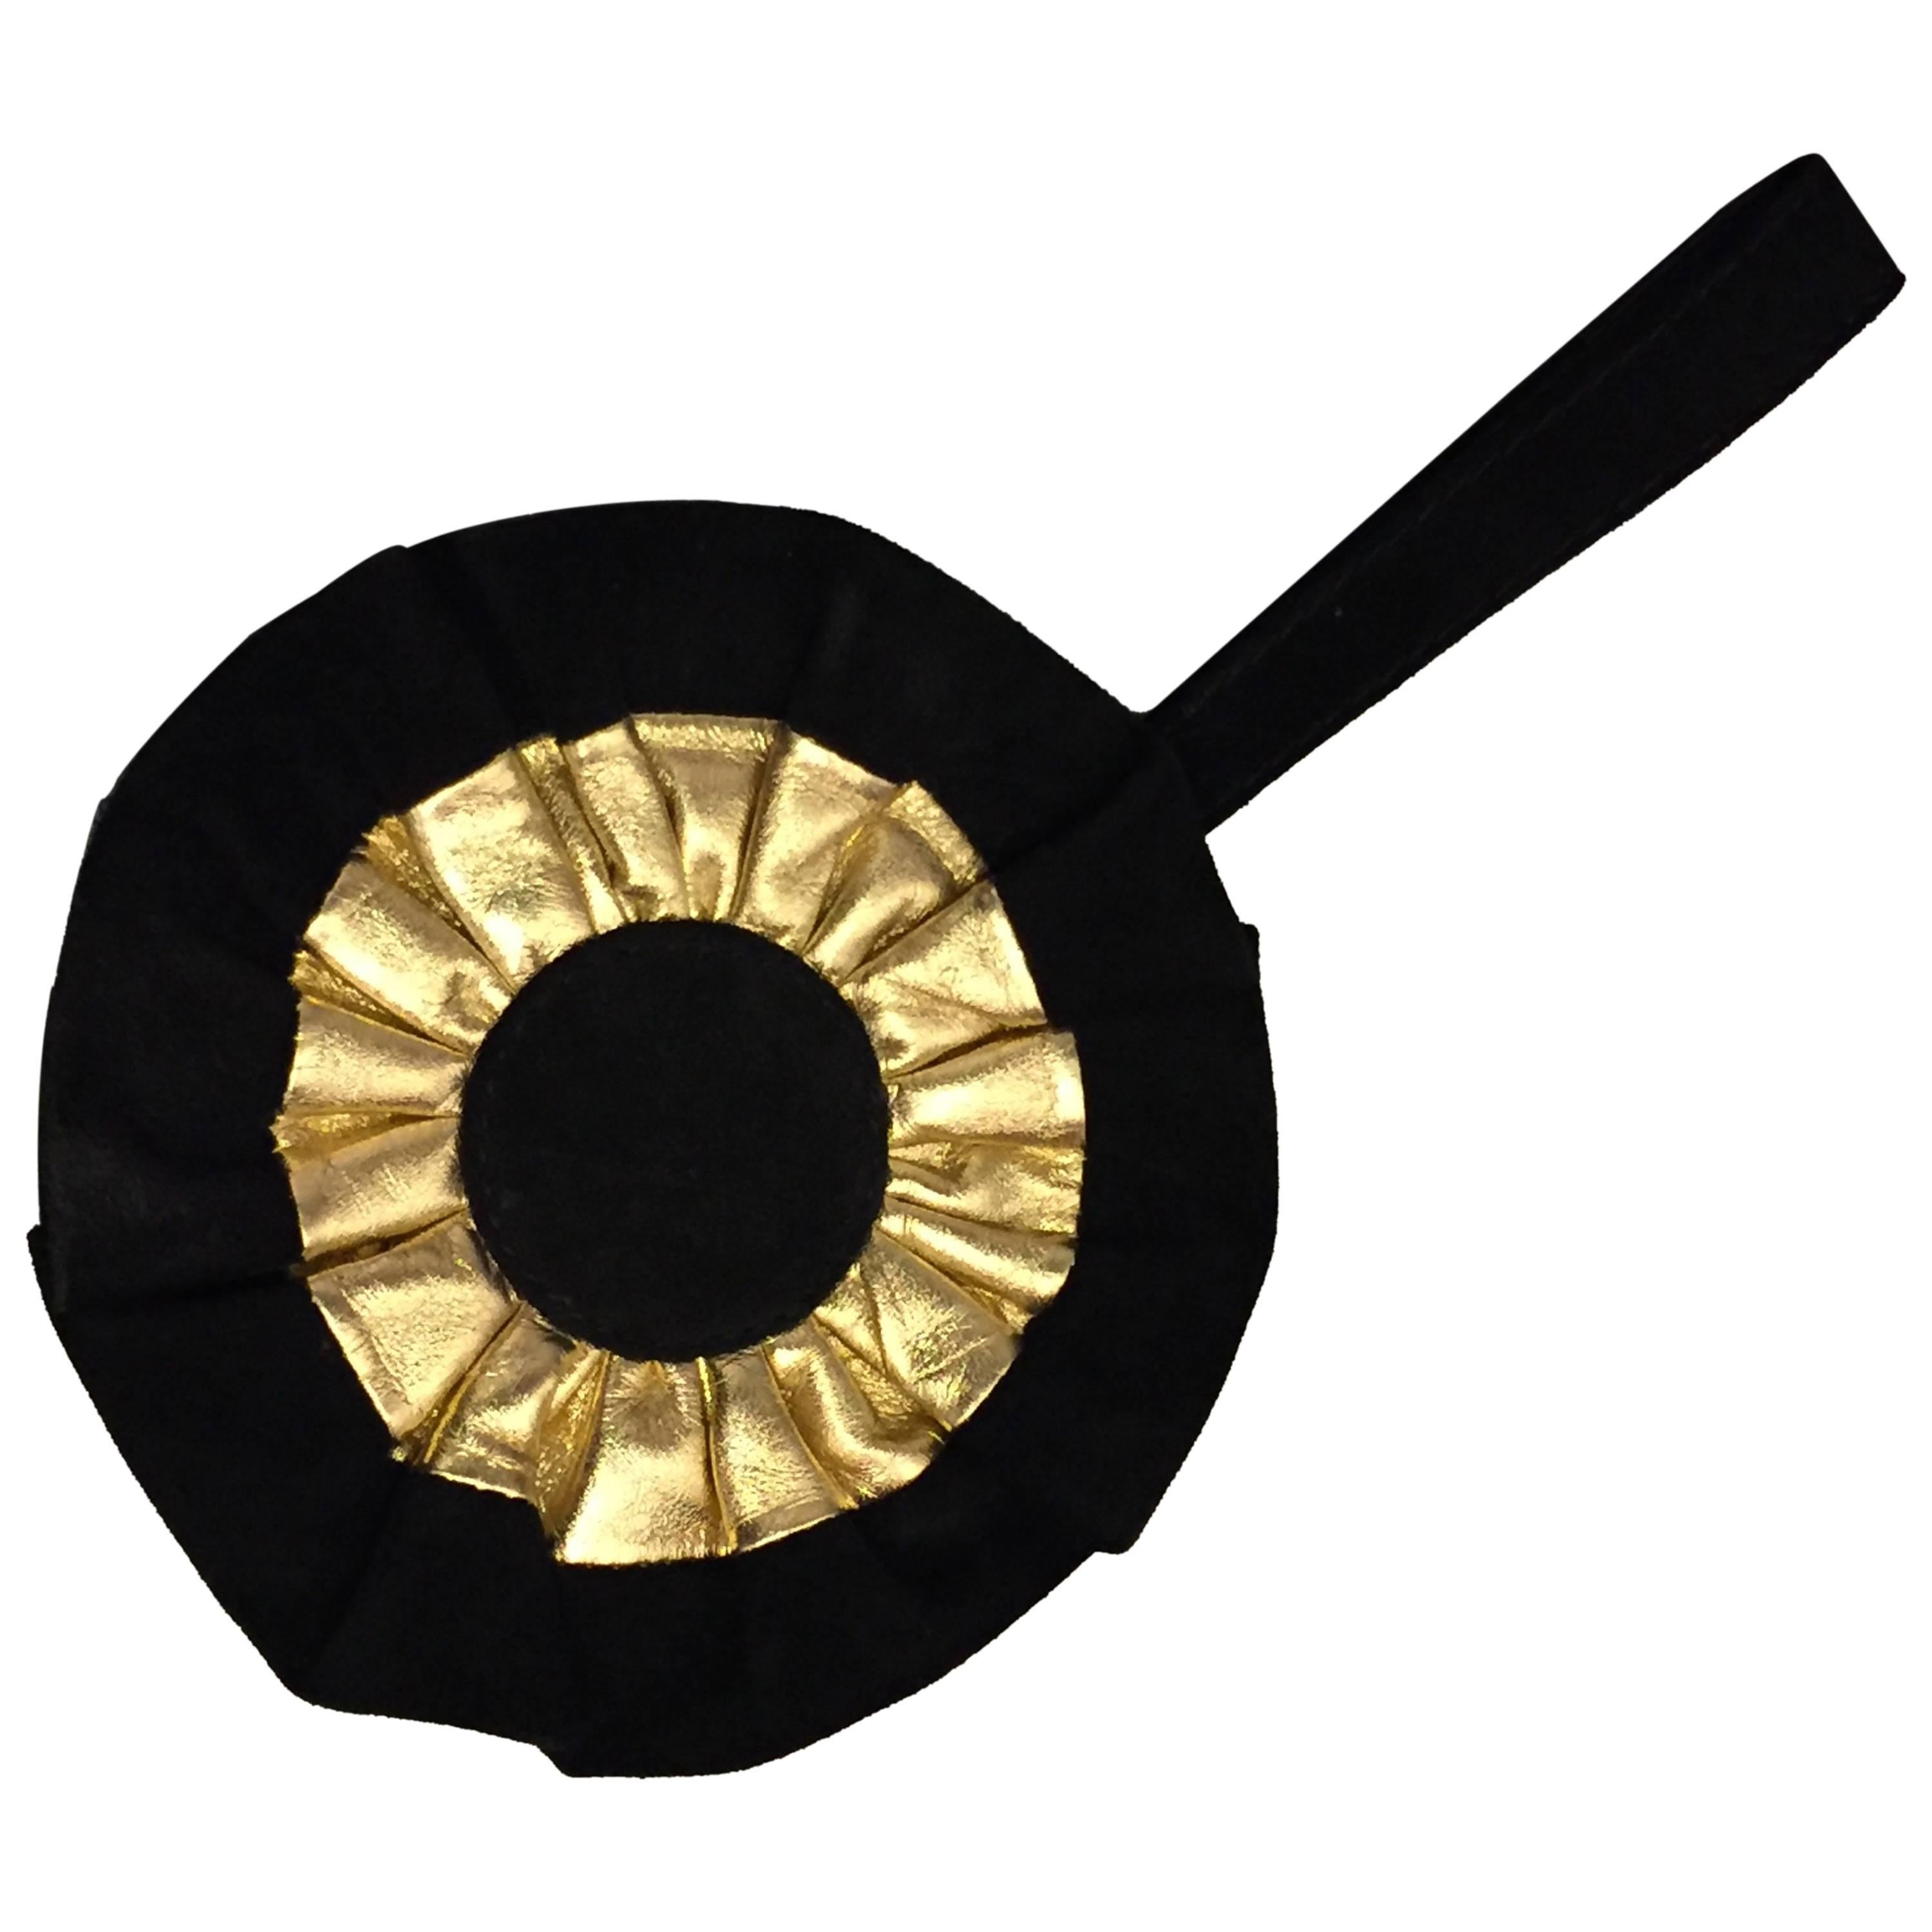 1980s Maud Frizon Gold Leather and Black Suede Wrist Bag in Cockade Design For Sale